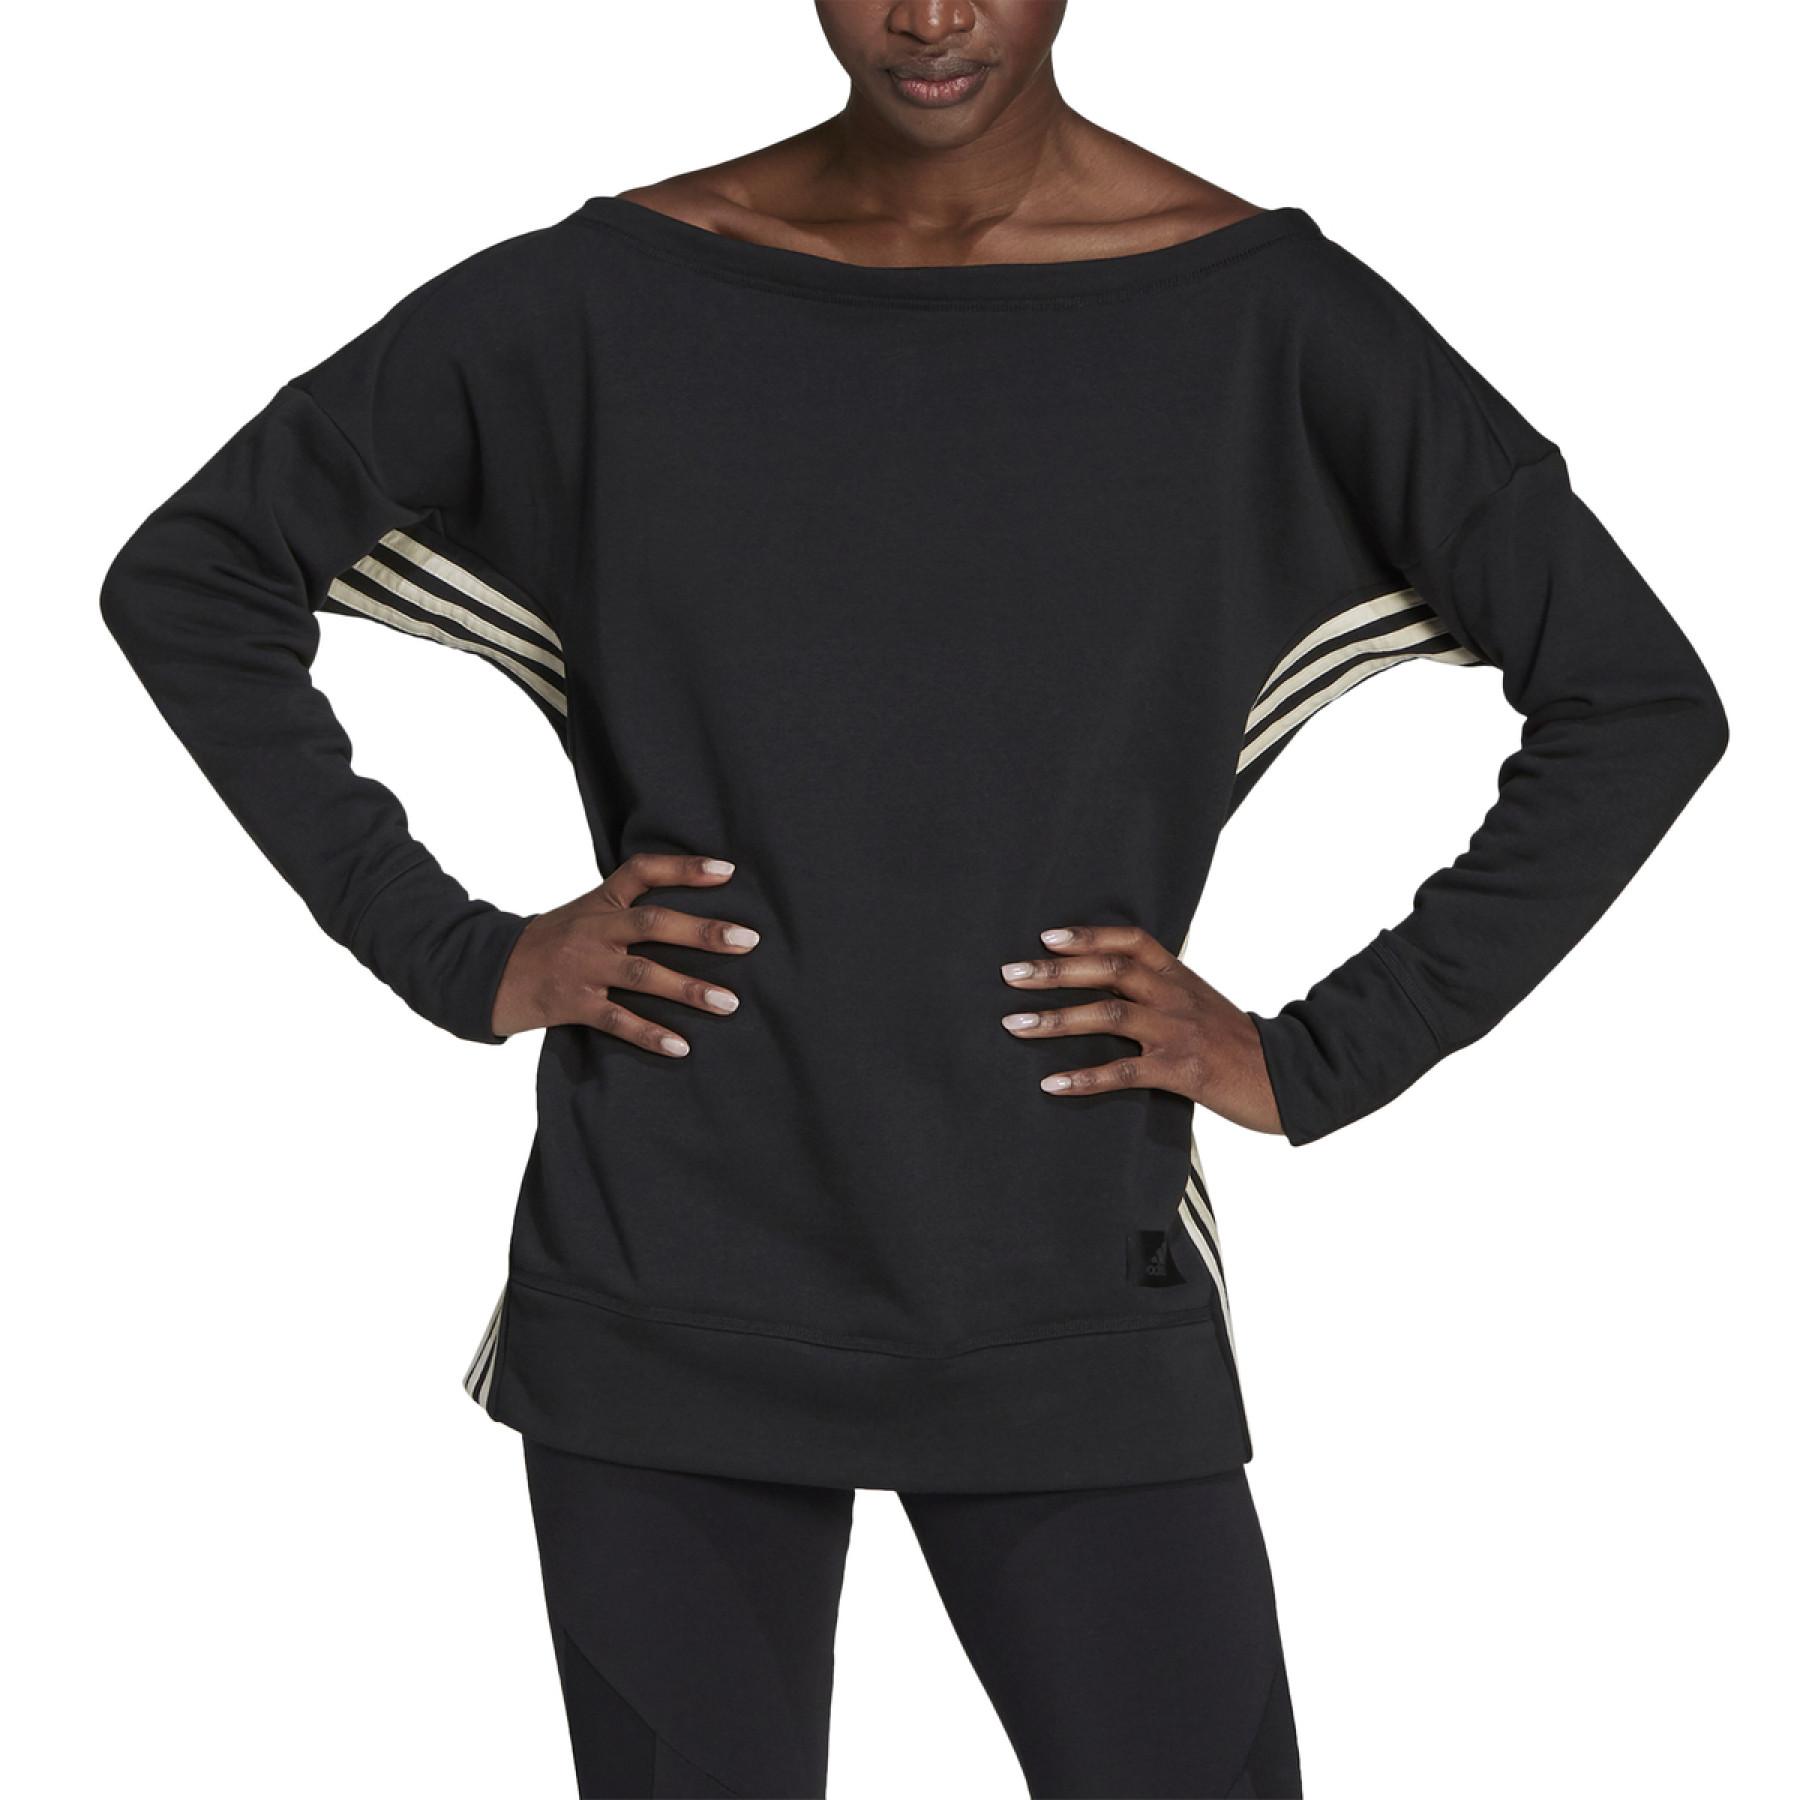 Sweatshirt woman adidas Womens Recycled Cotton Cover-Up